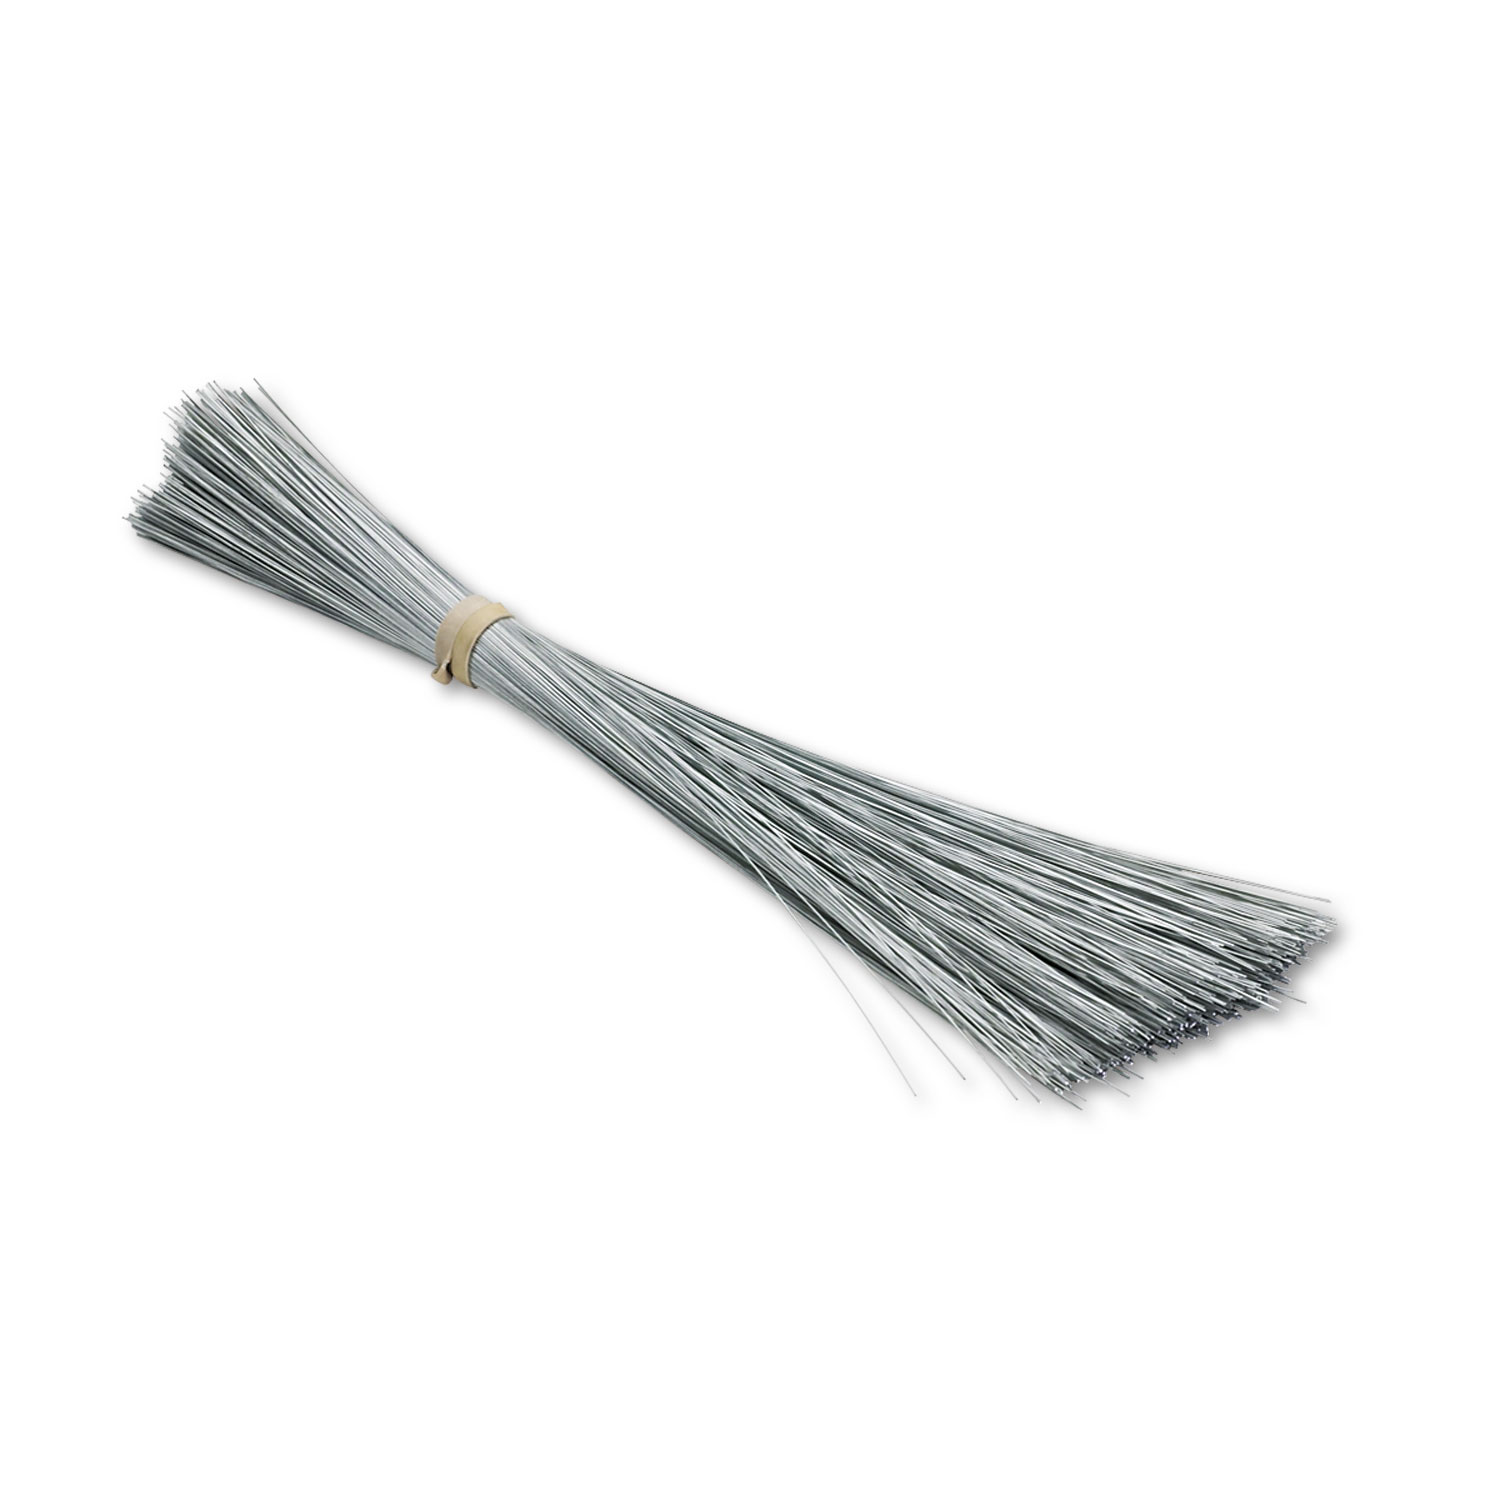 Tag Wires, Wire, 12 Long, 1,000/Pack